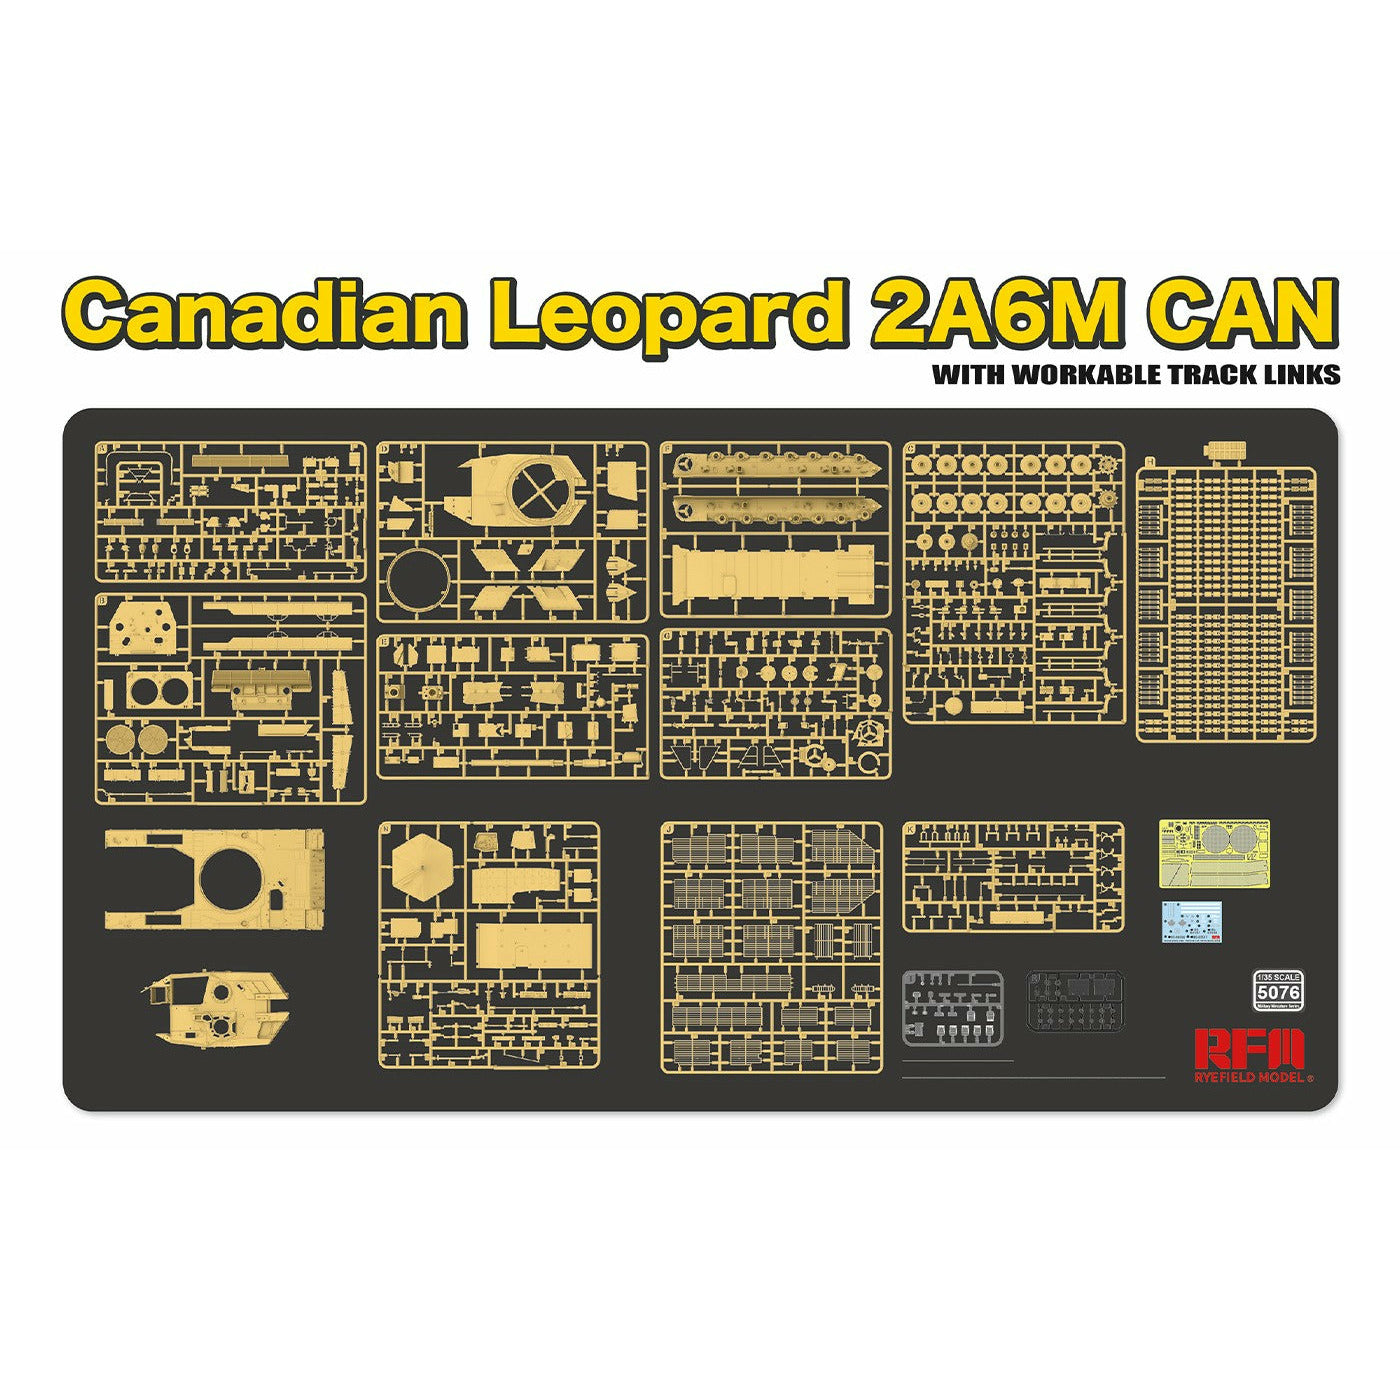 Canadian Leopard 2A6M Can w/ Workable Tracks 1/35 #RM-5076 by Ryefield Model